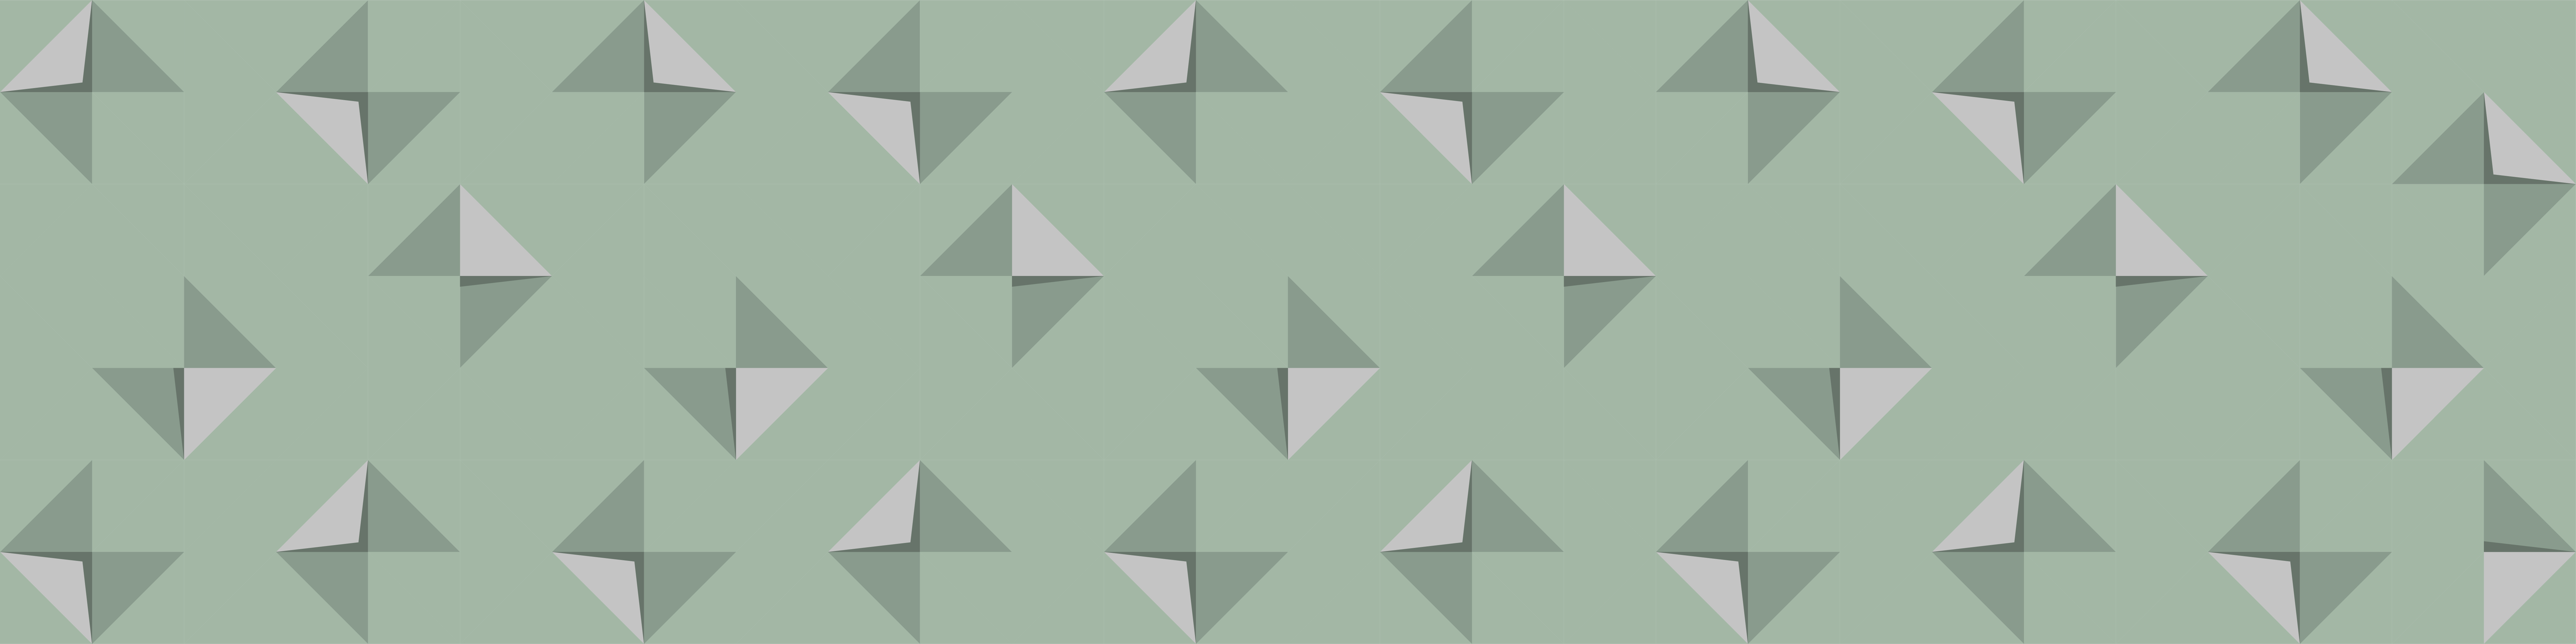 Featured Image Origami Grey Lots